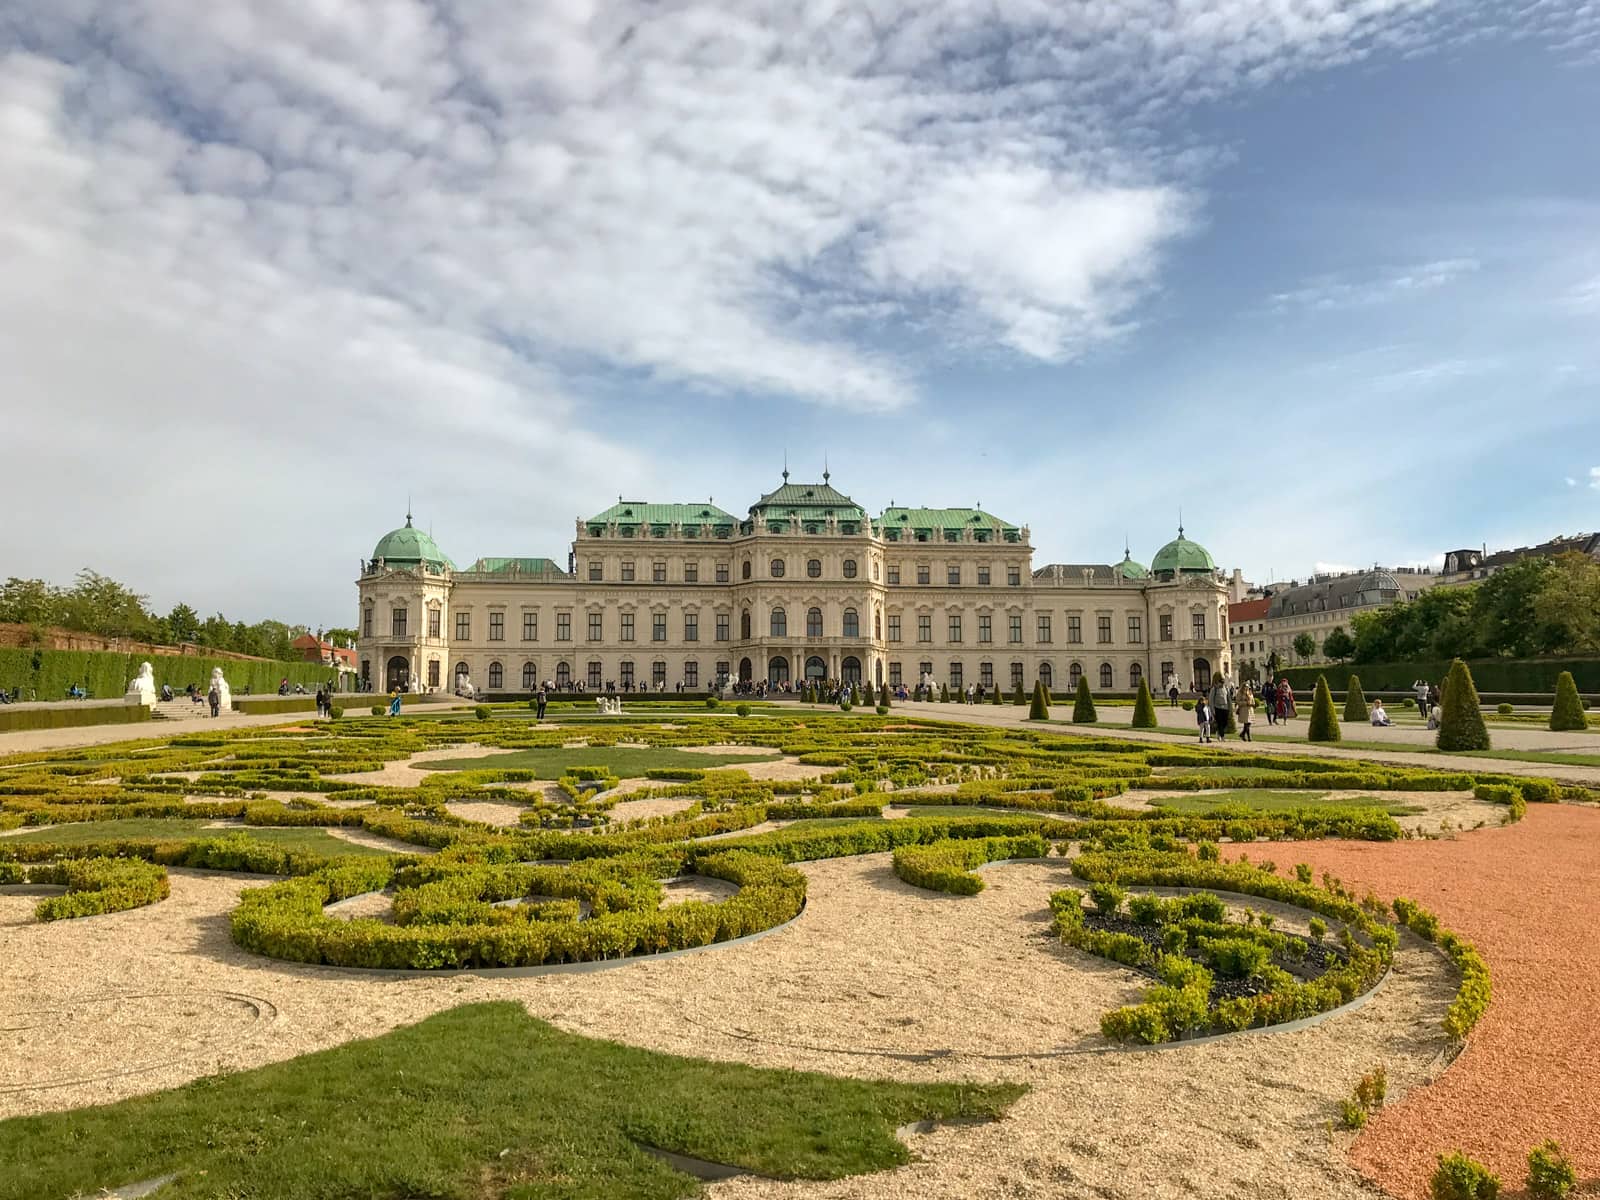 The Schössgarten grounds, with short hedges making a swirly pattern on the lawn in the foreground. There is a streak of white clouds across the sky